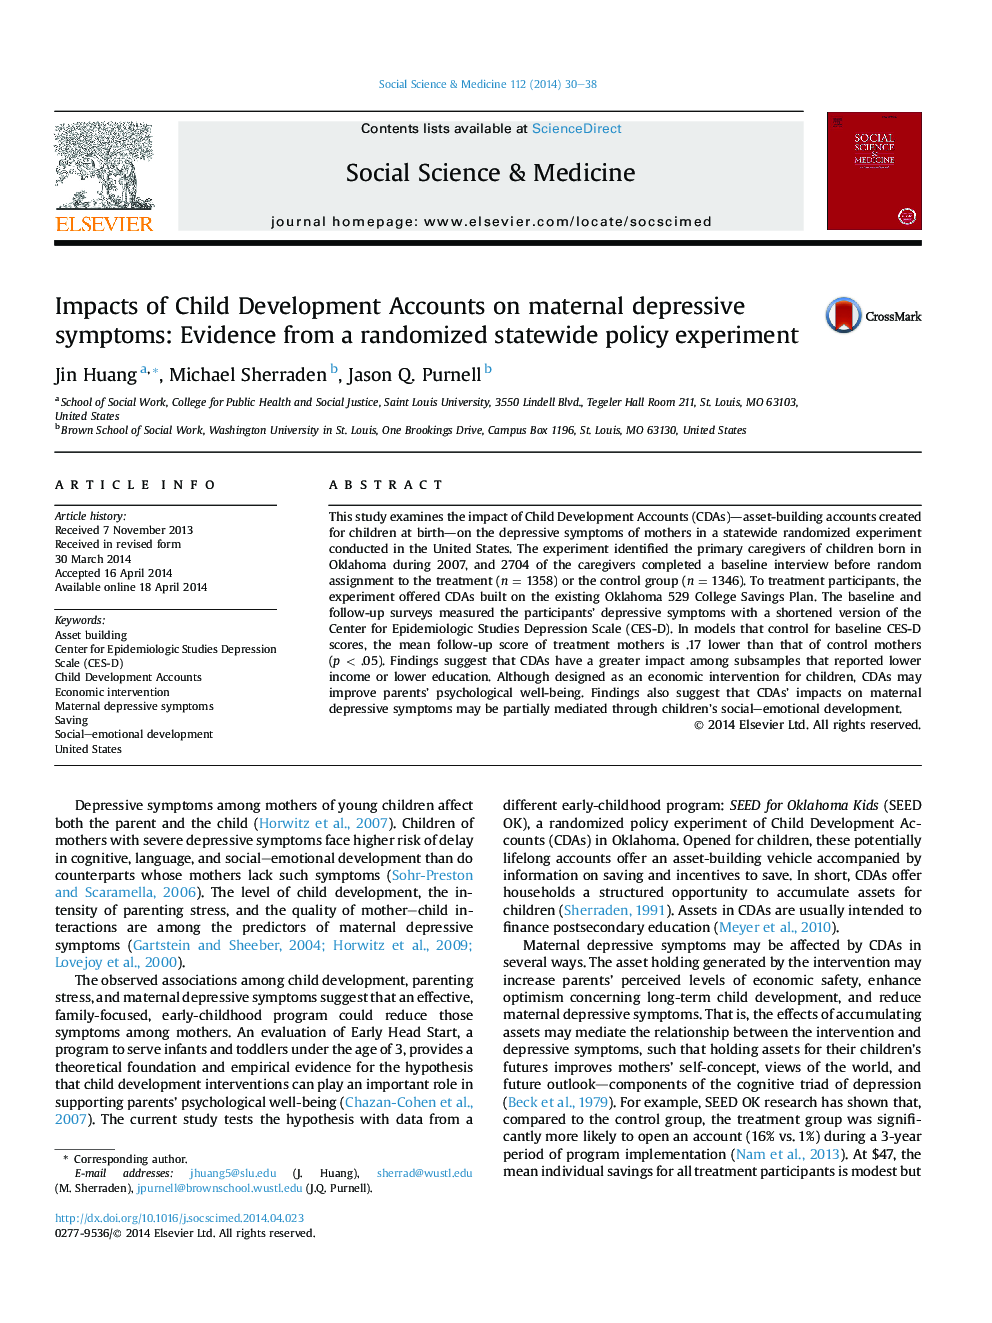 Impacts of Child Development Accounts on maternal depressive symptoms: Evidence from a randomized statewide policy experiment